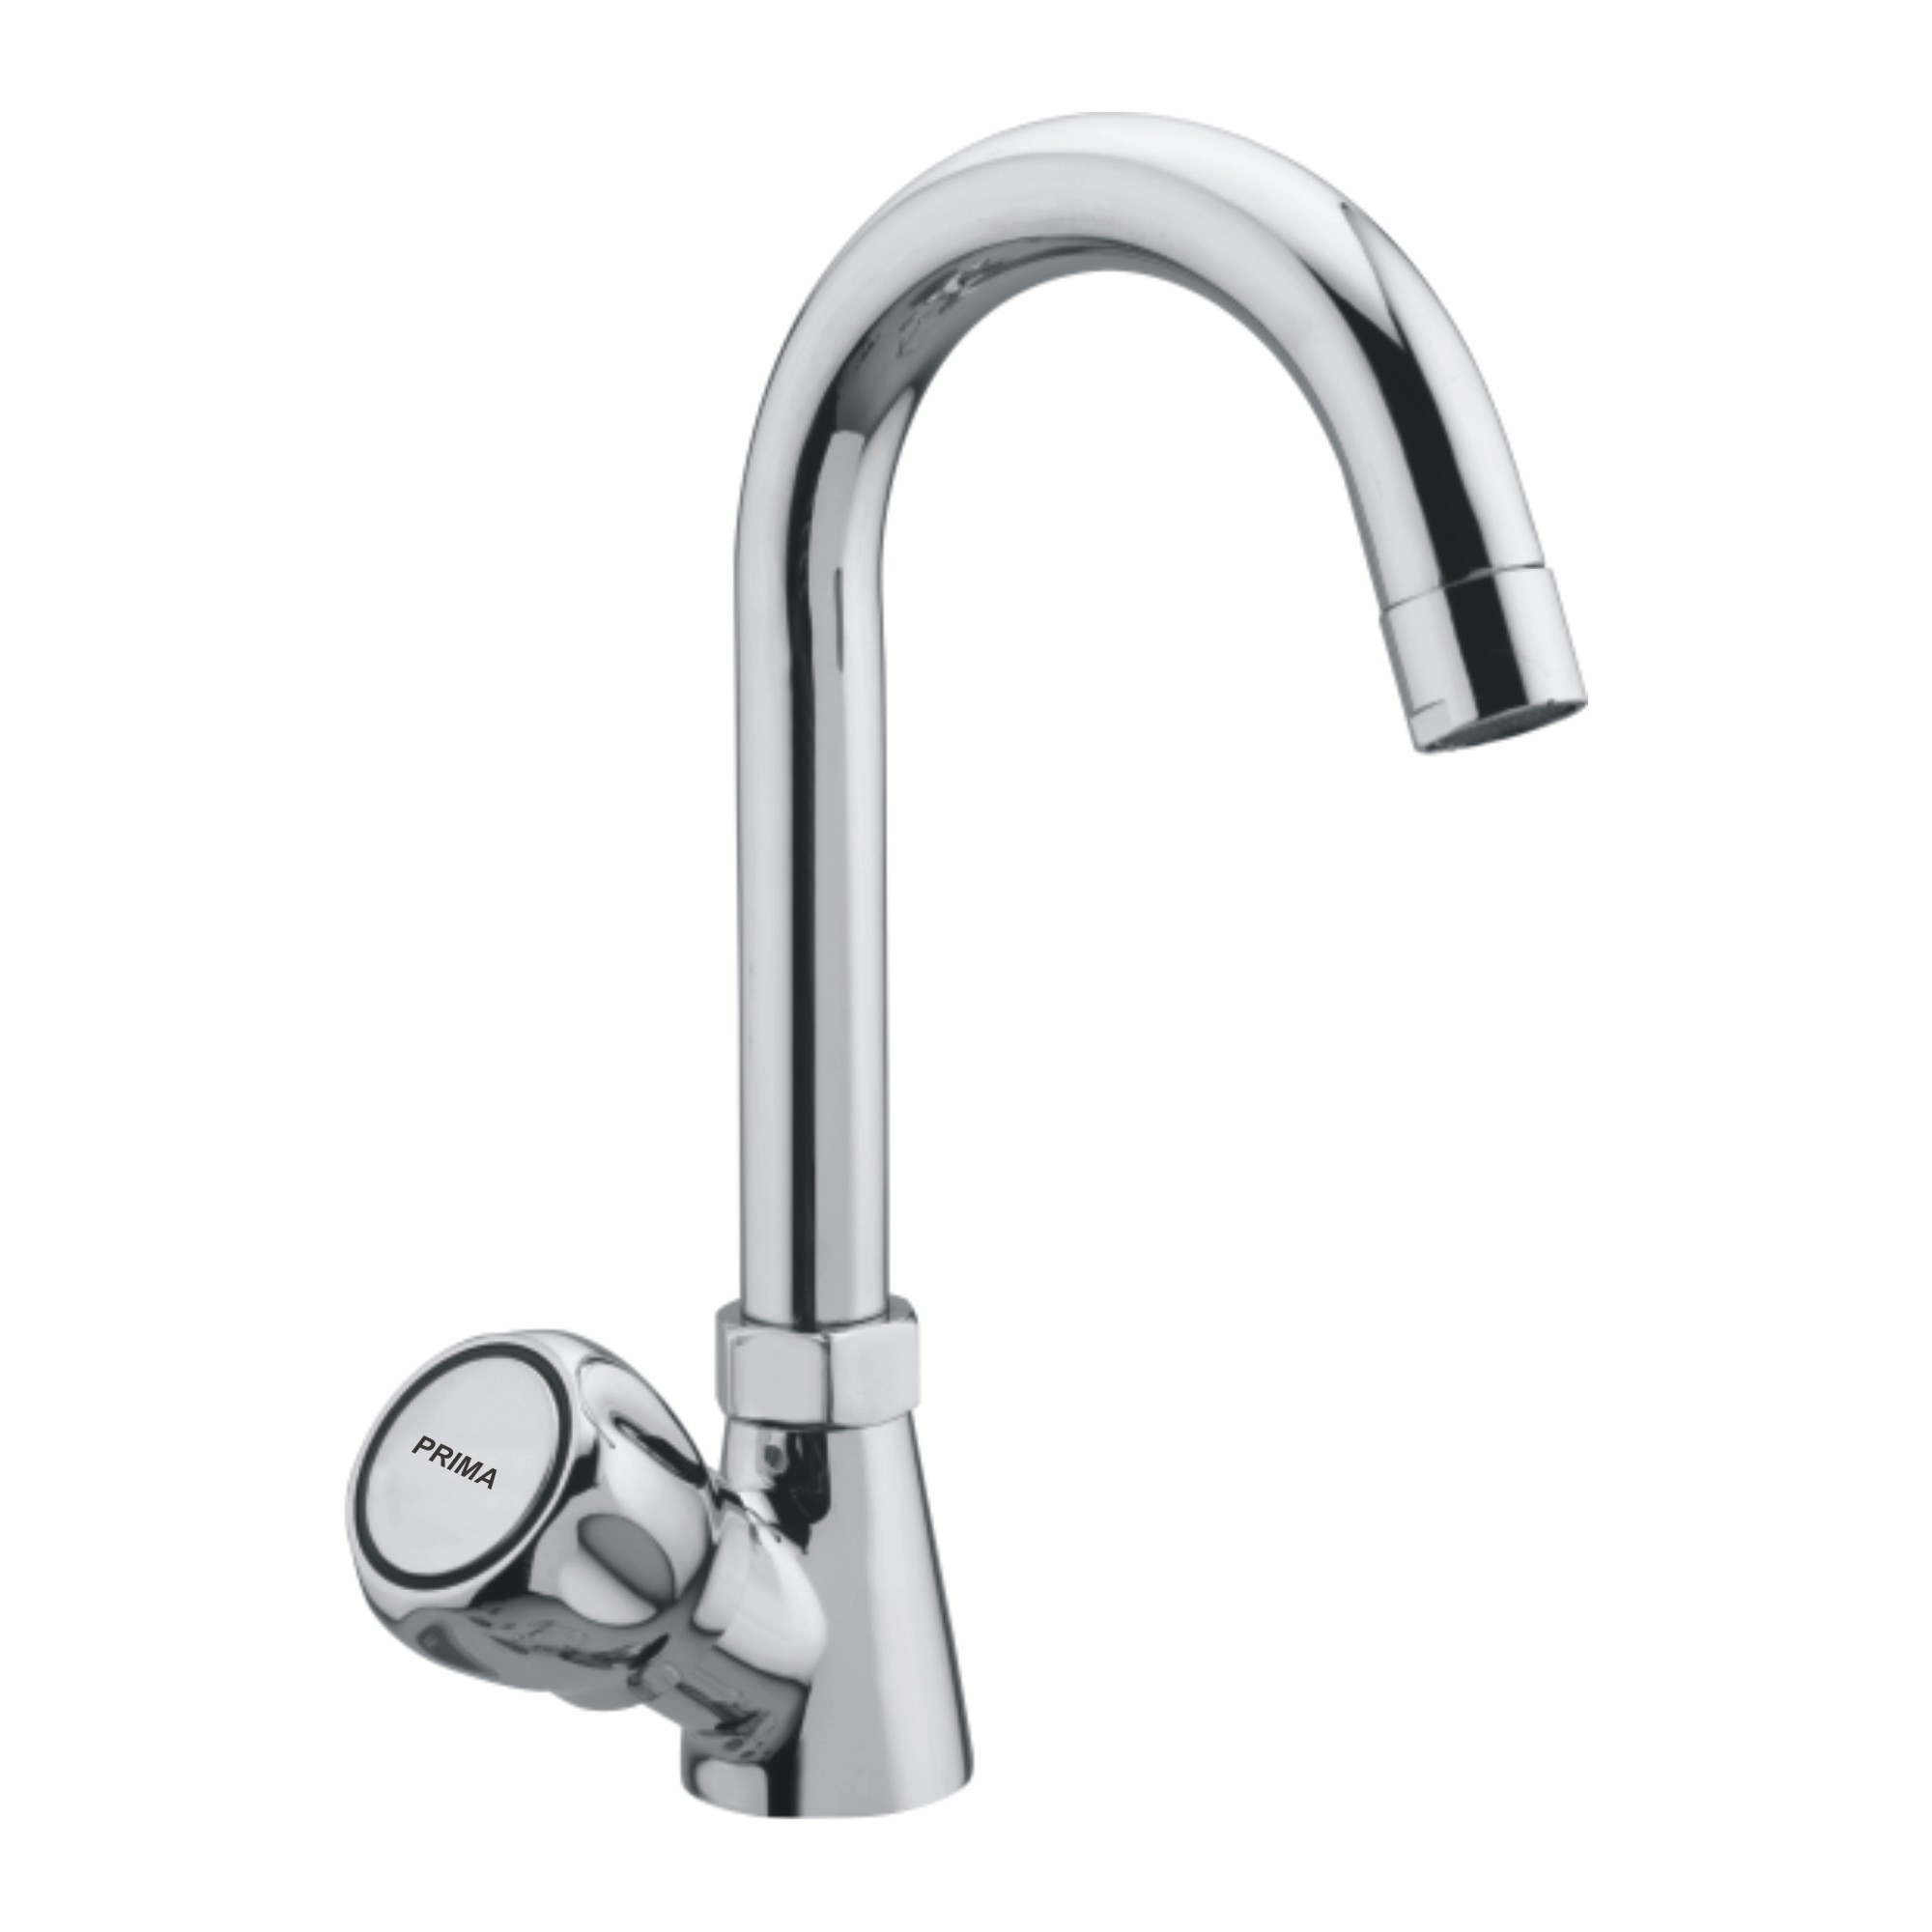 C.P Swan Neck with Swivel Spout